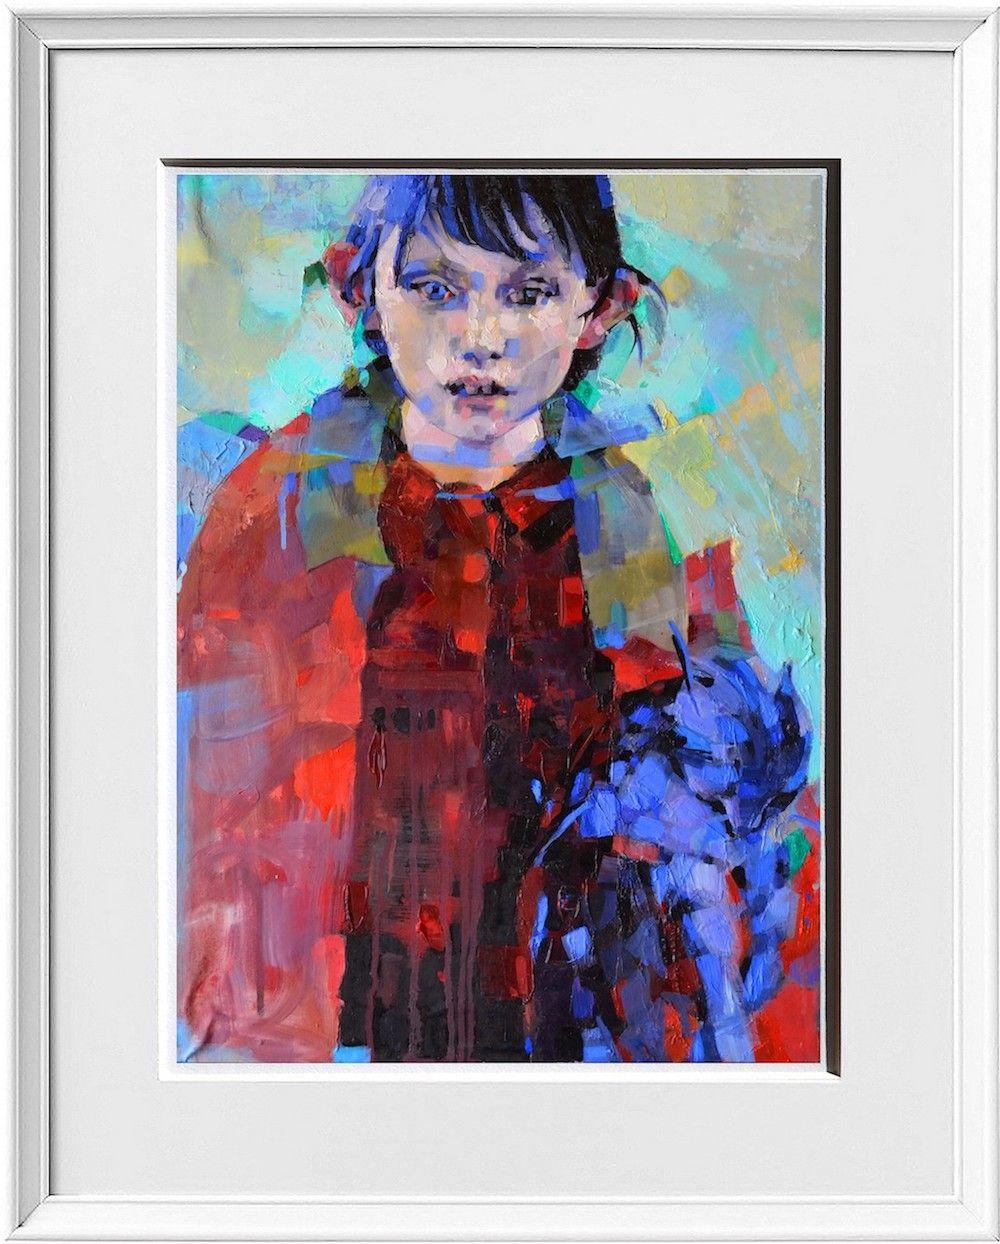 Mounted giclÃ©e print, limited edition of 100  -Size with mount: 40x30cm/16